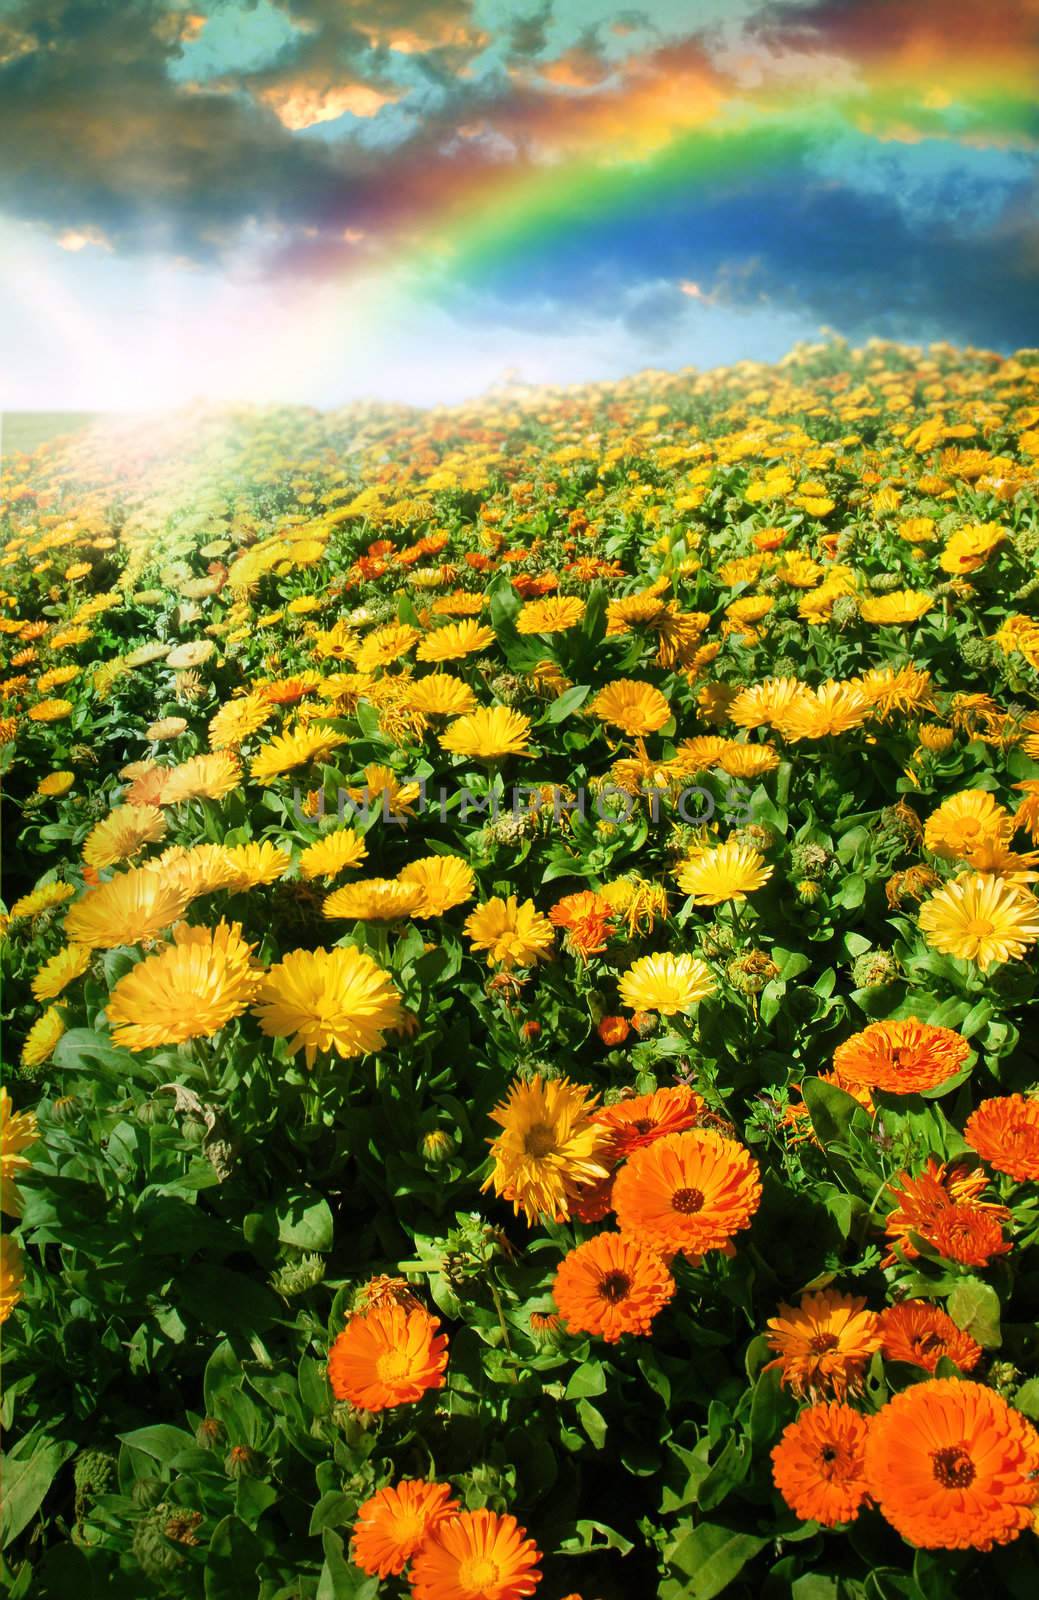 Flower meadow and rainbow by cienpies